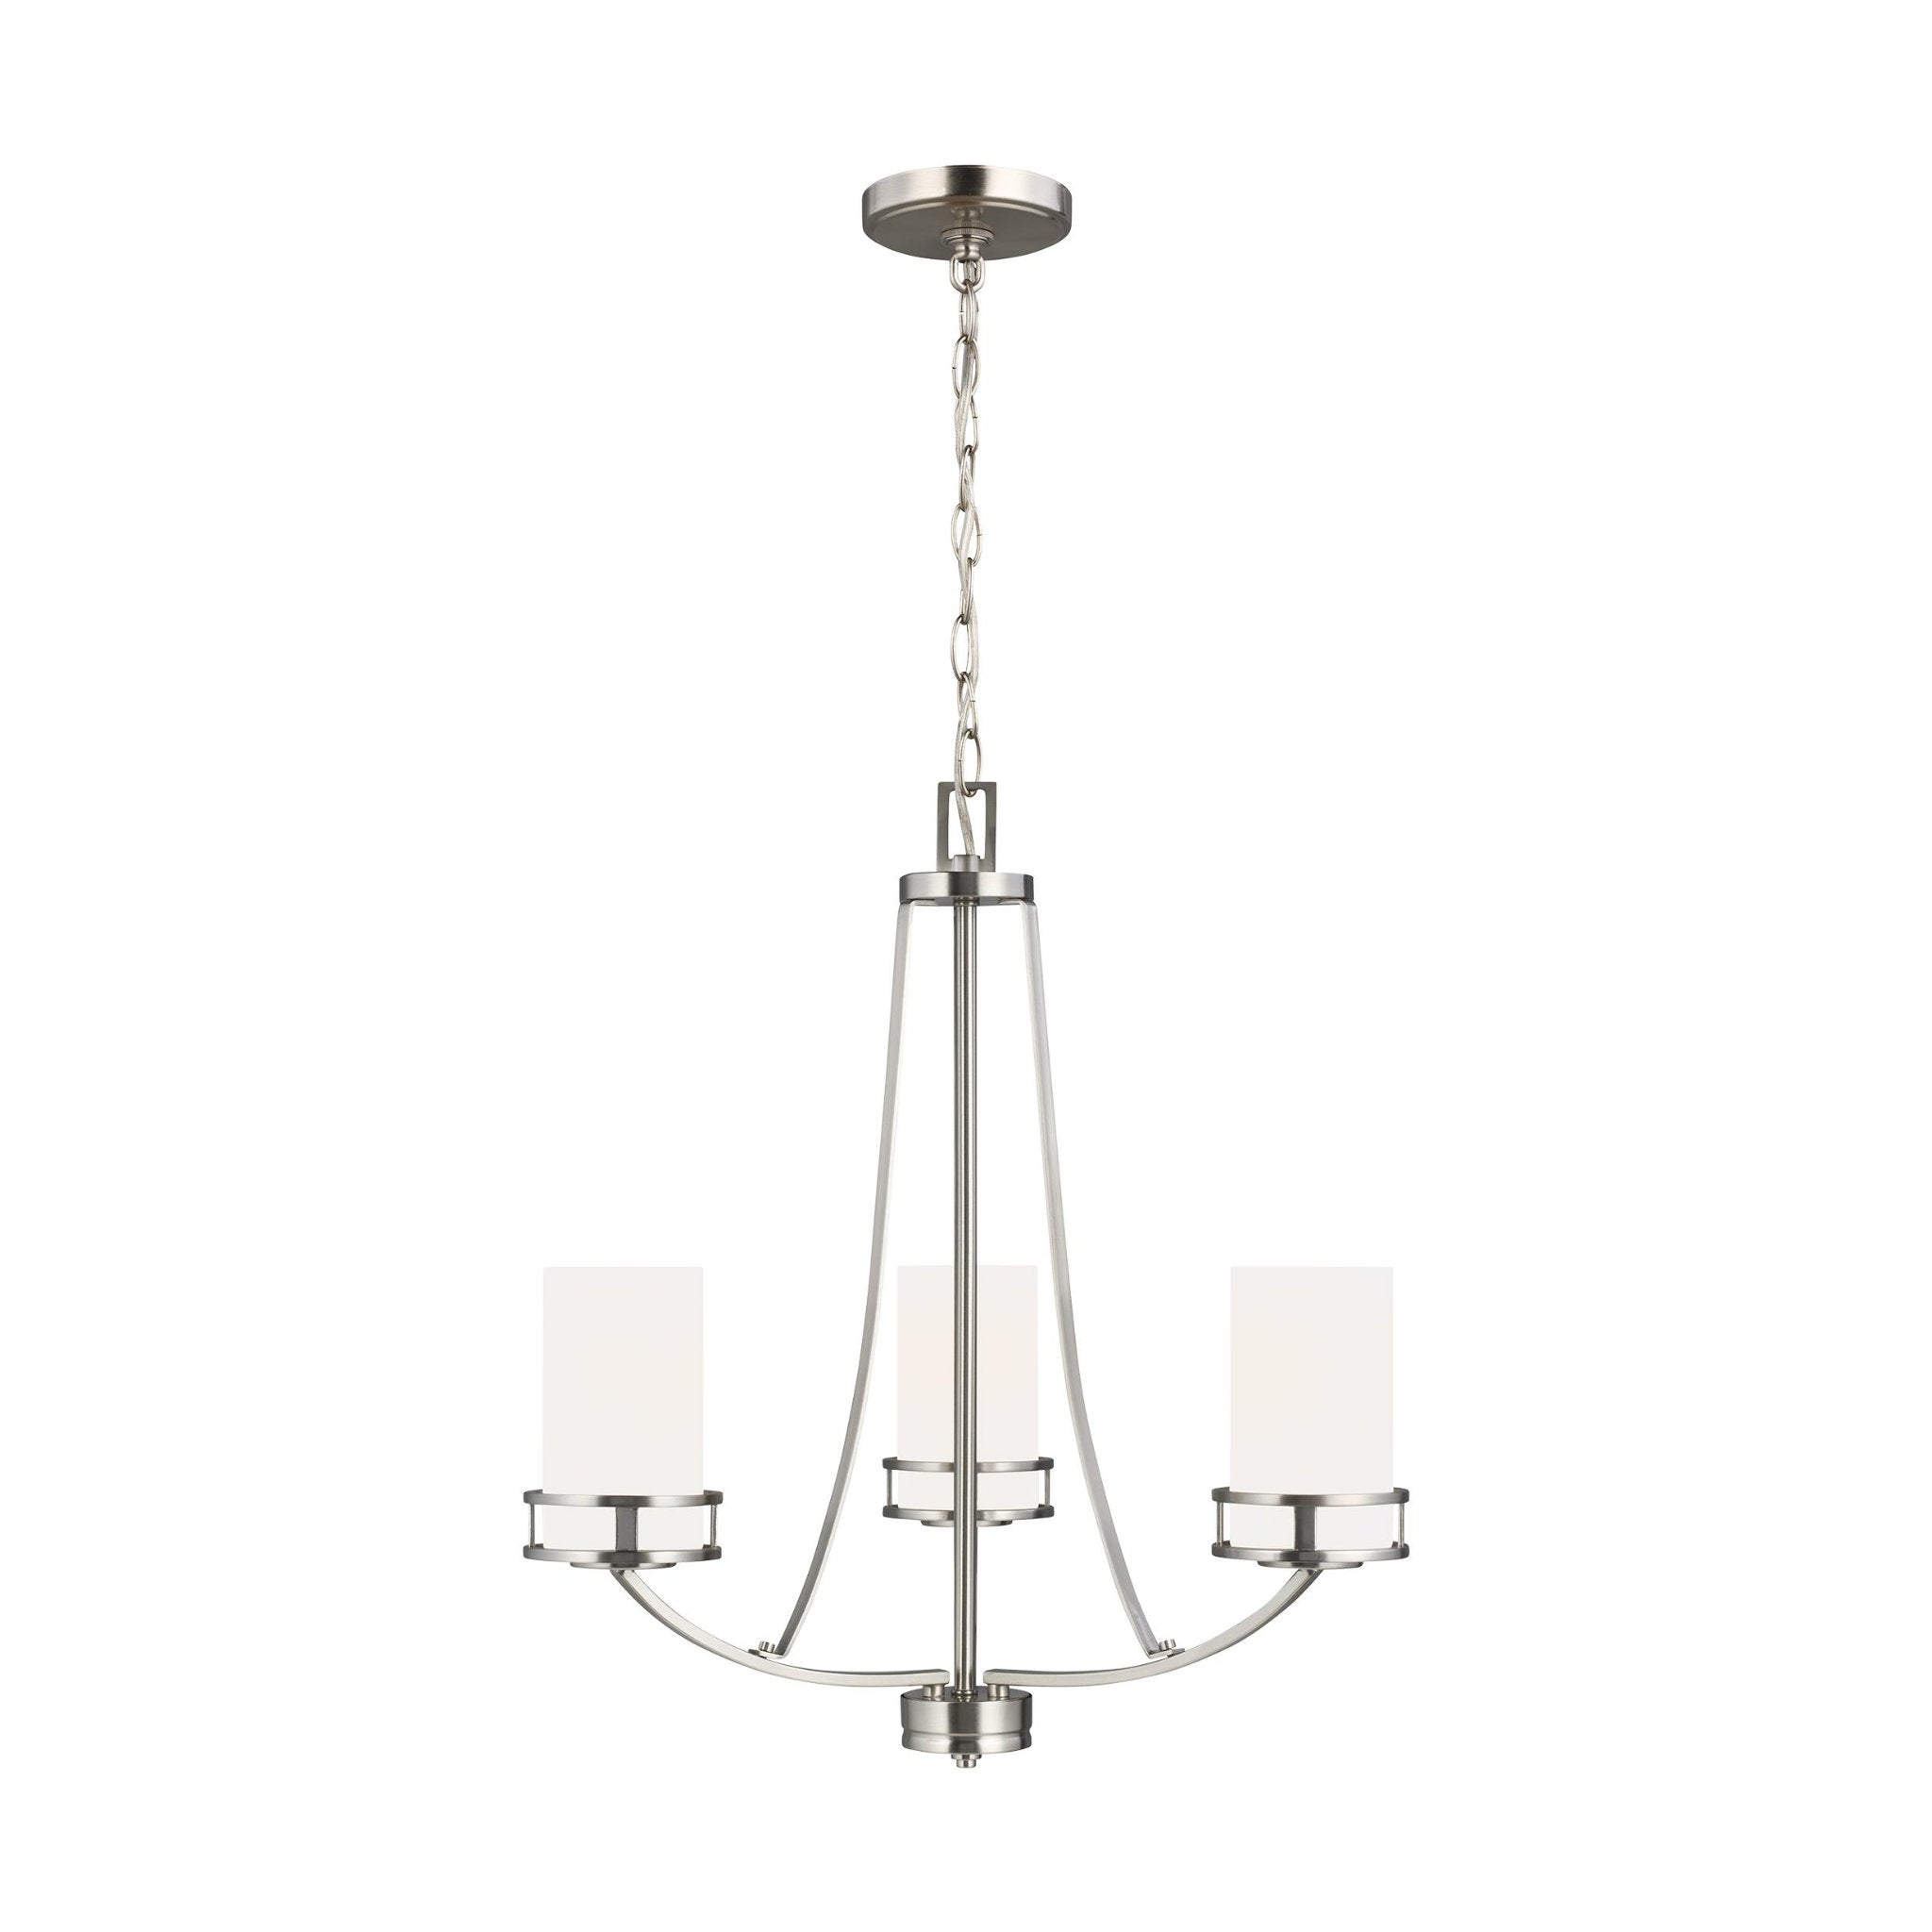 Robie Three Light Chandelier Transitional 22.125" Height Steel Round Etched / White Inside Shade in Brushed Nickel